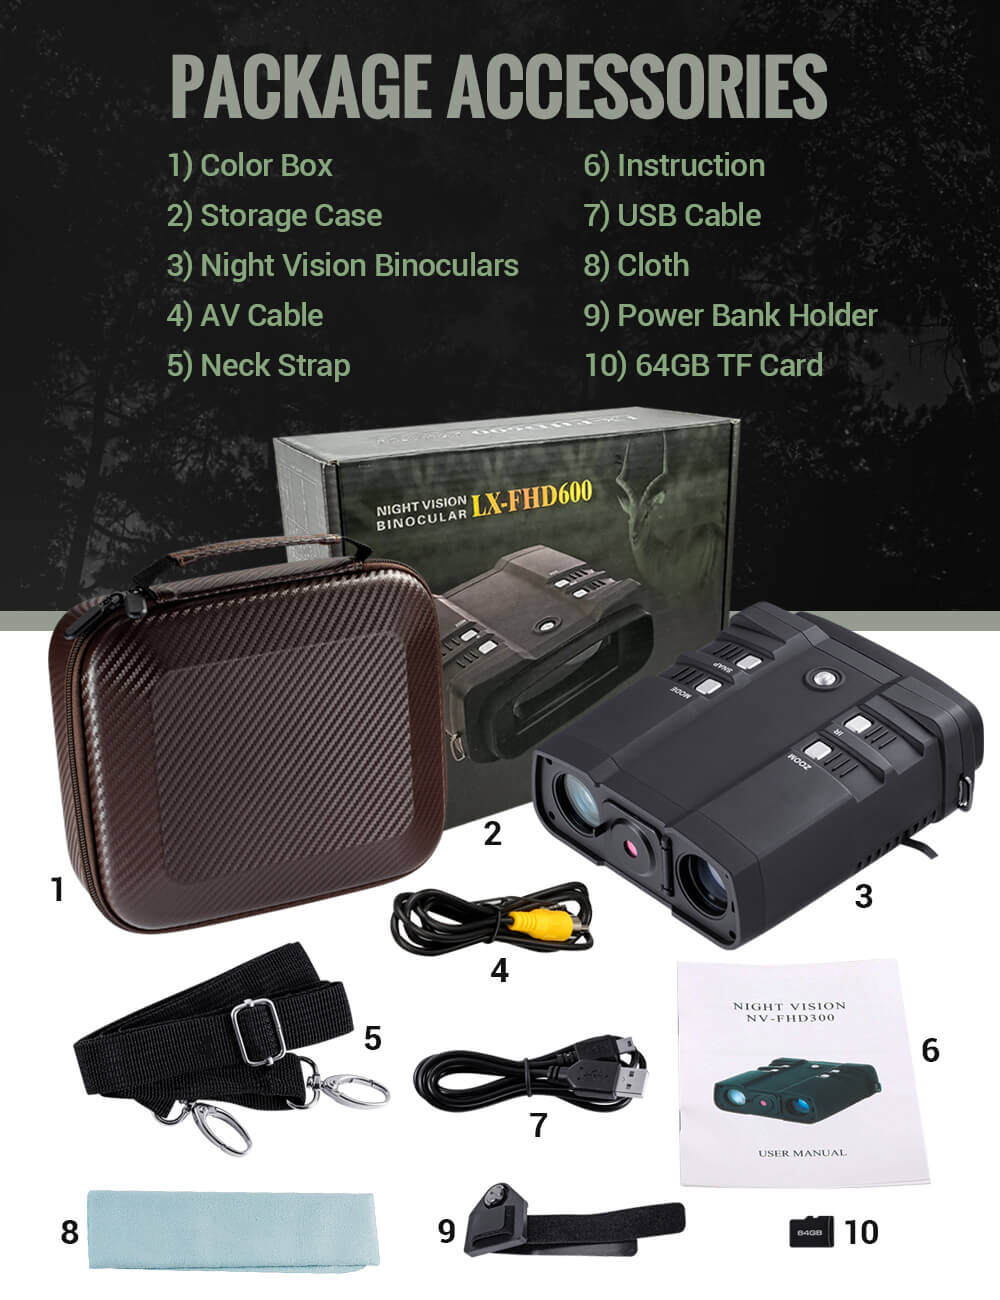 uscamel X73022 - package includes, storage case, night vision binoculars, av cable, nect strap, user manula, use cable, power bank holder, cloth, 64G TF memory card